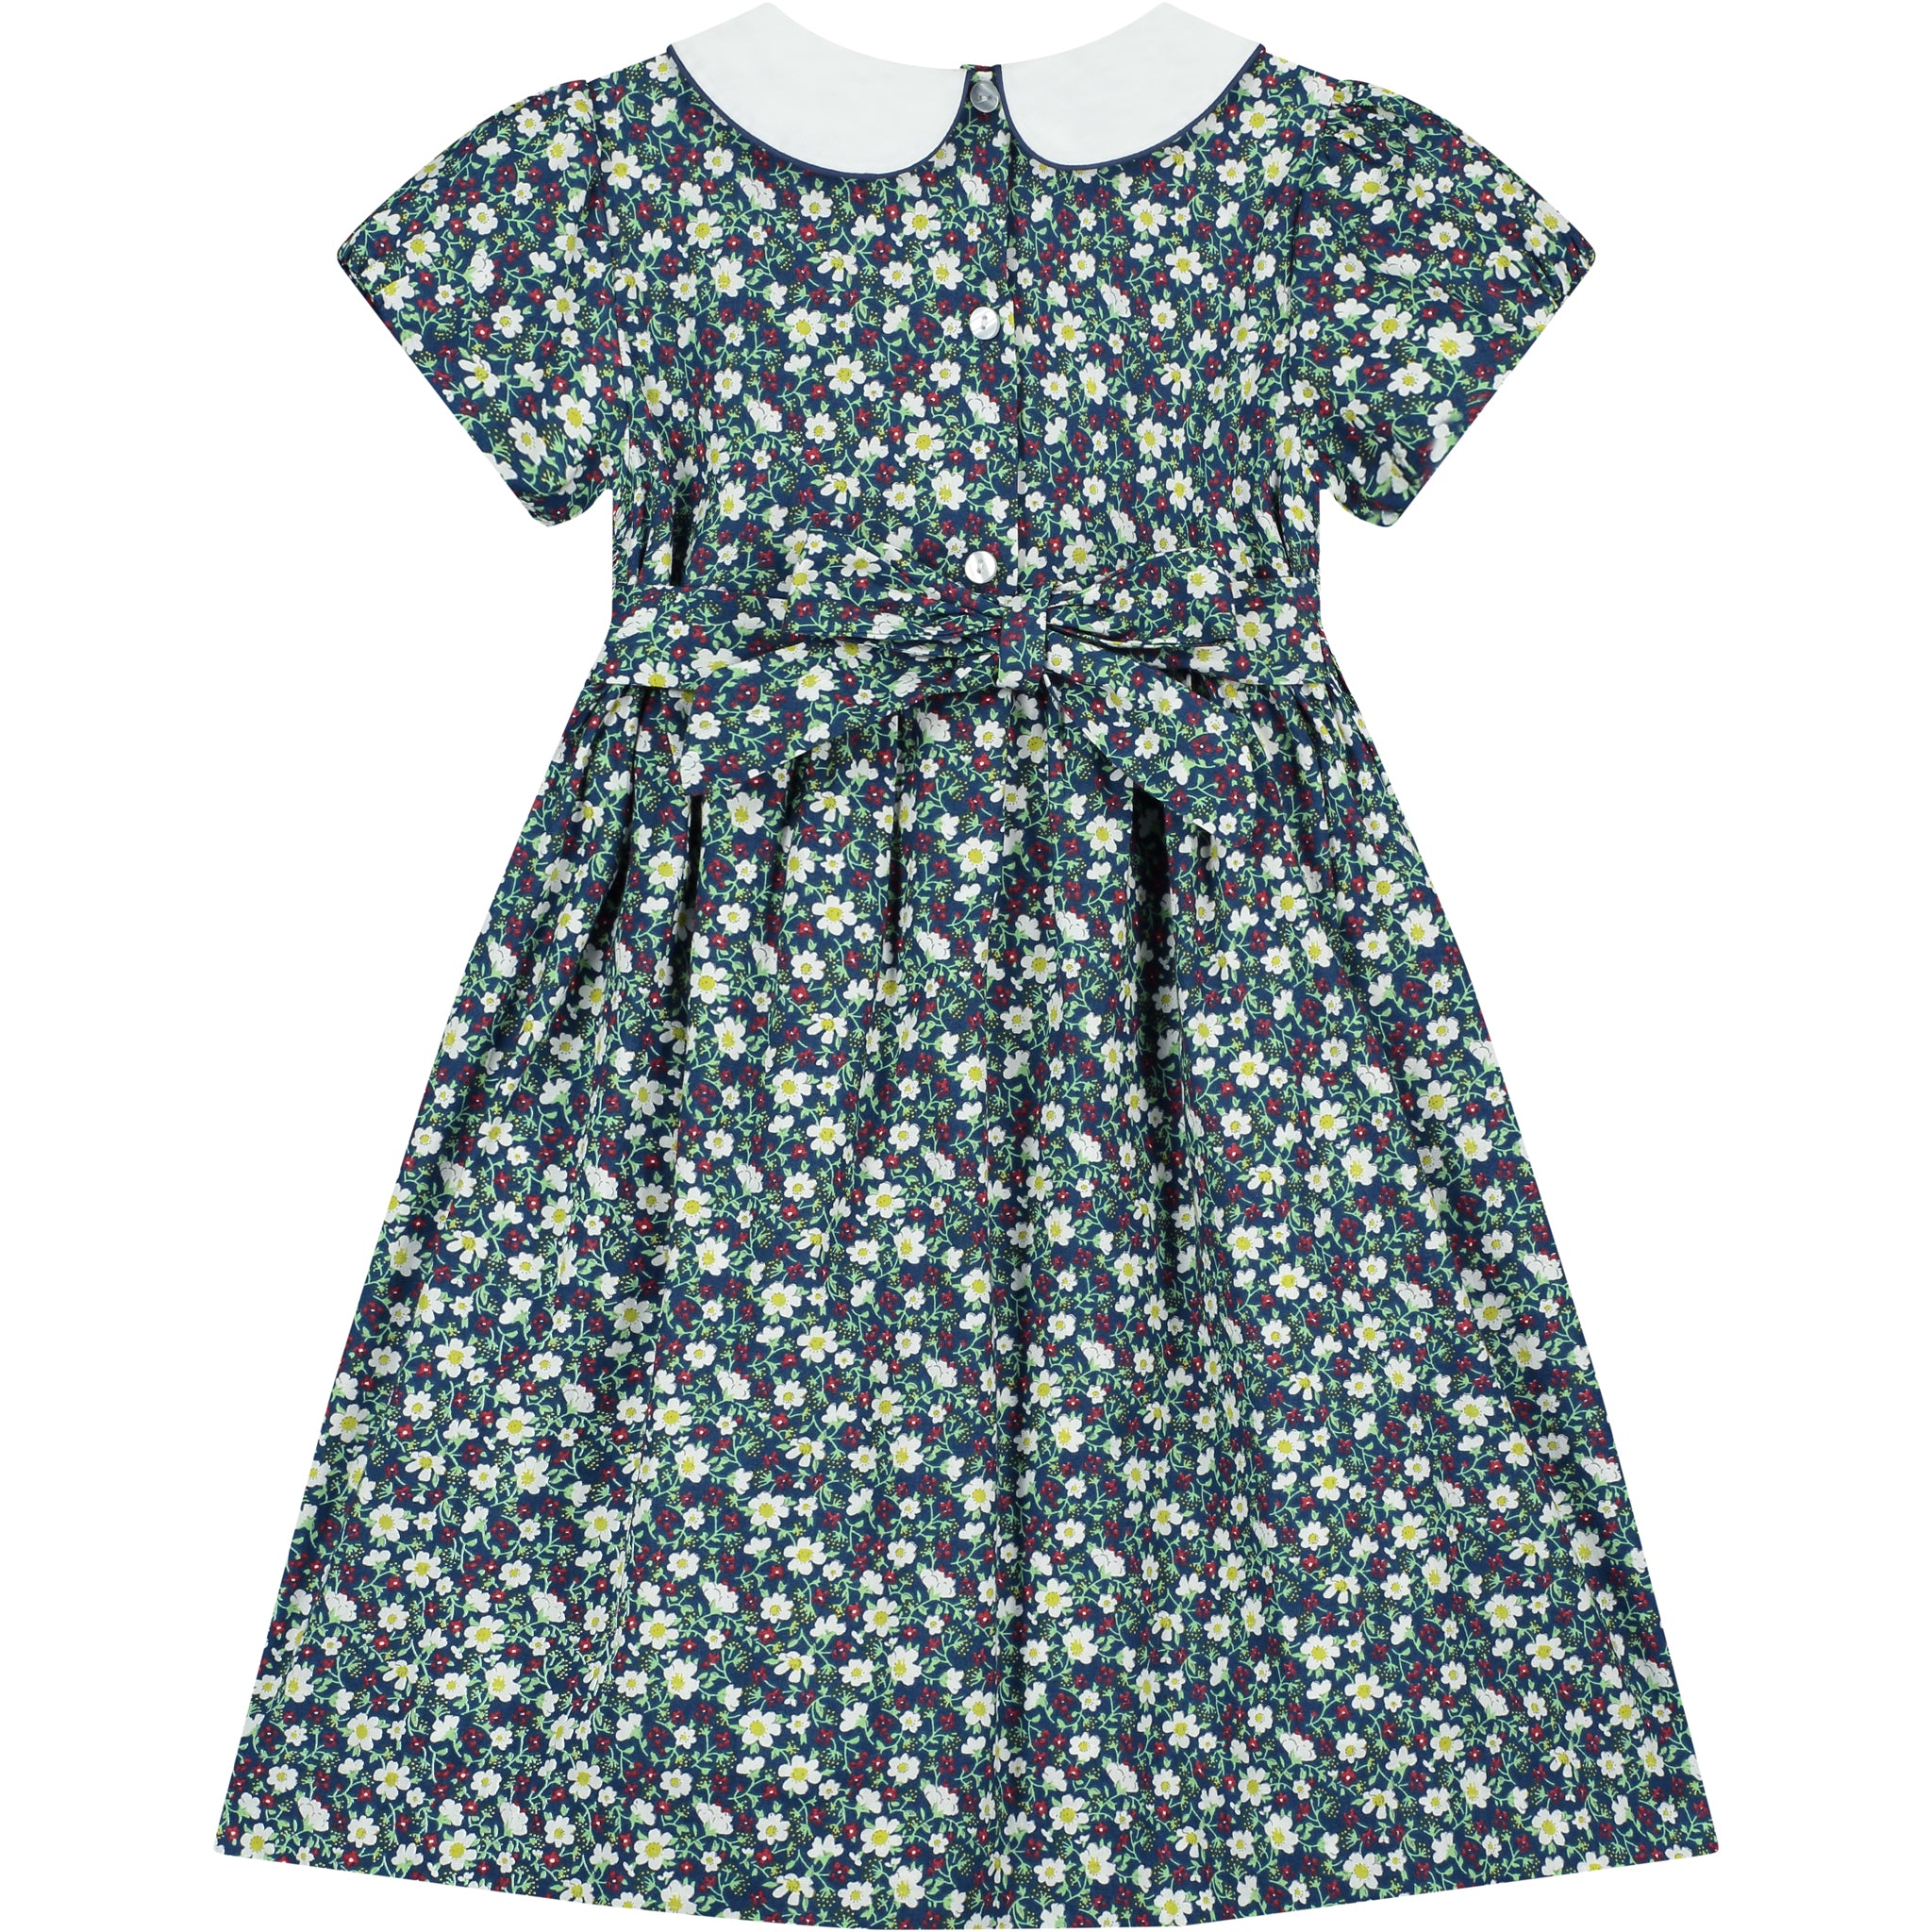 floral smock dress with white Peter Pan collar, back